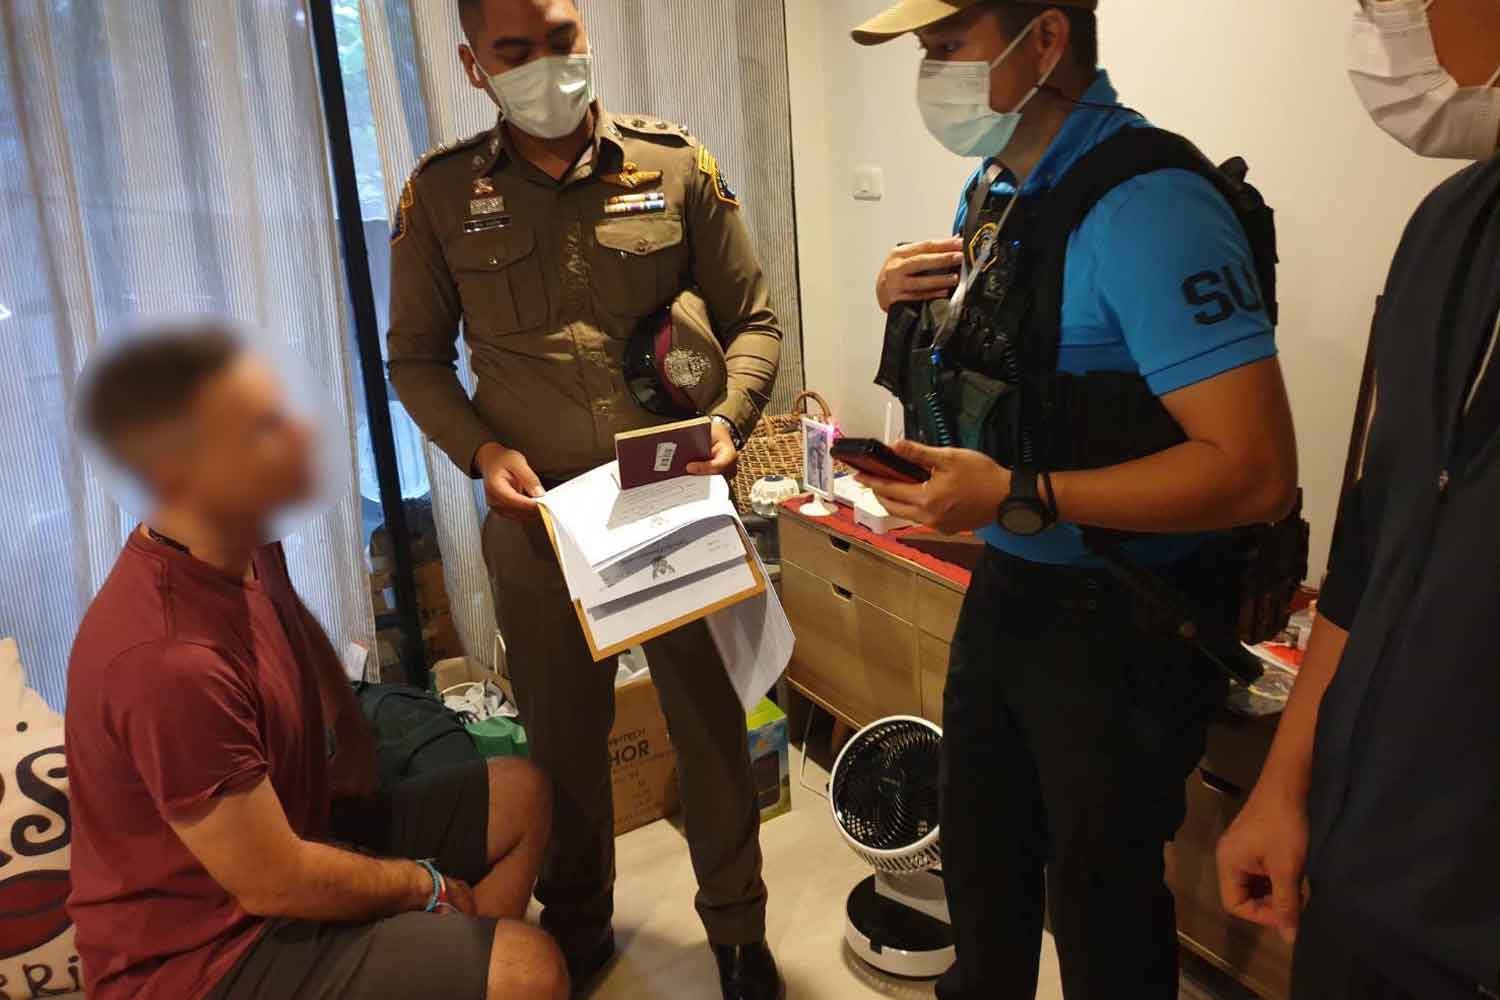 American Wanted in US $52 Million Embezzlement Case Arrested in Thailand